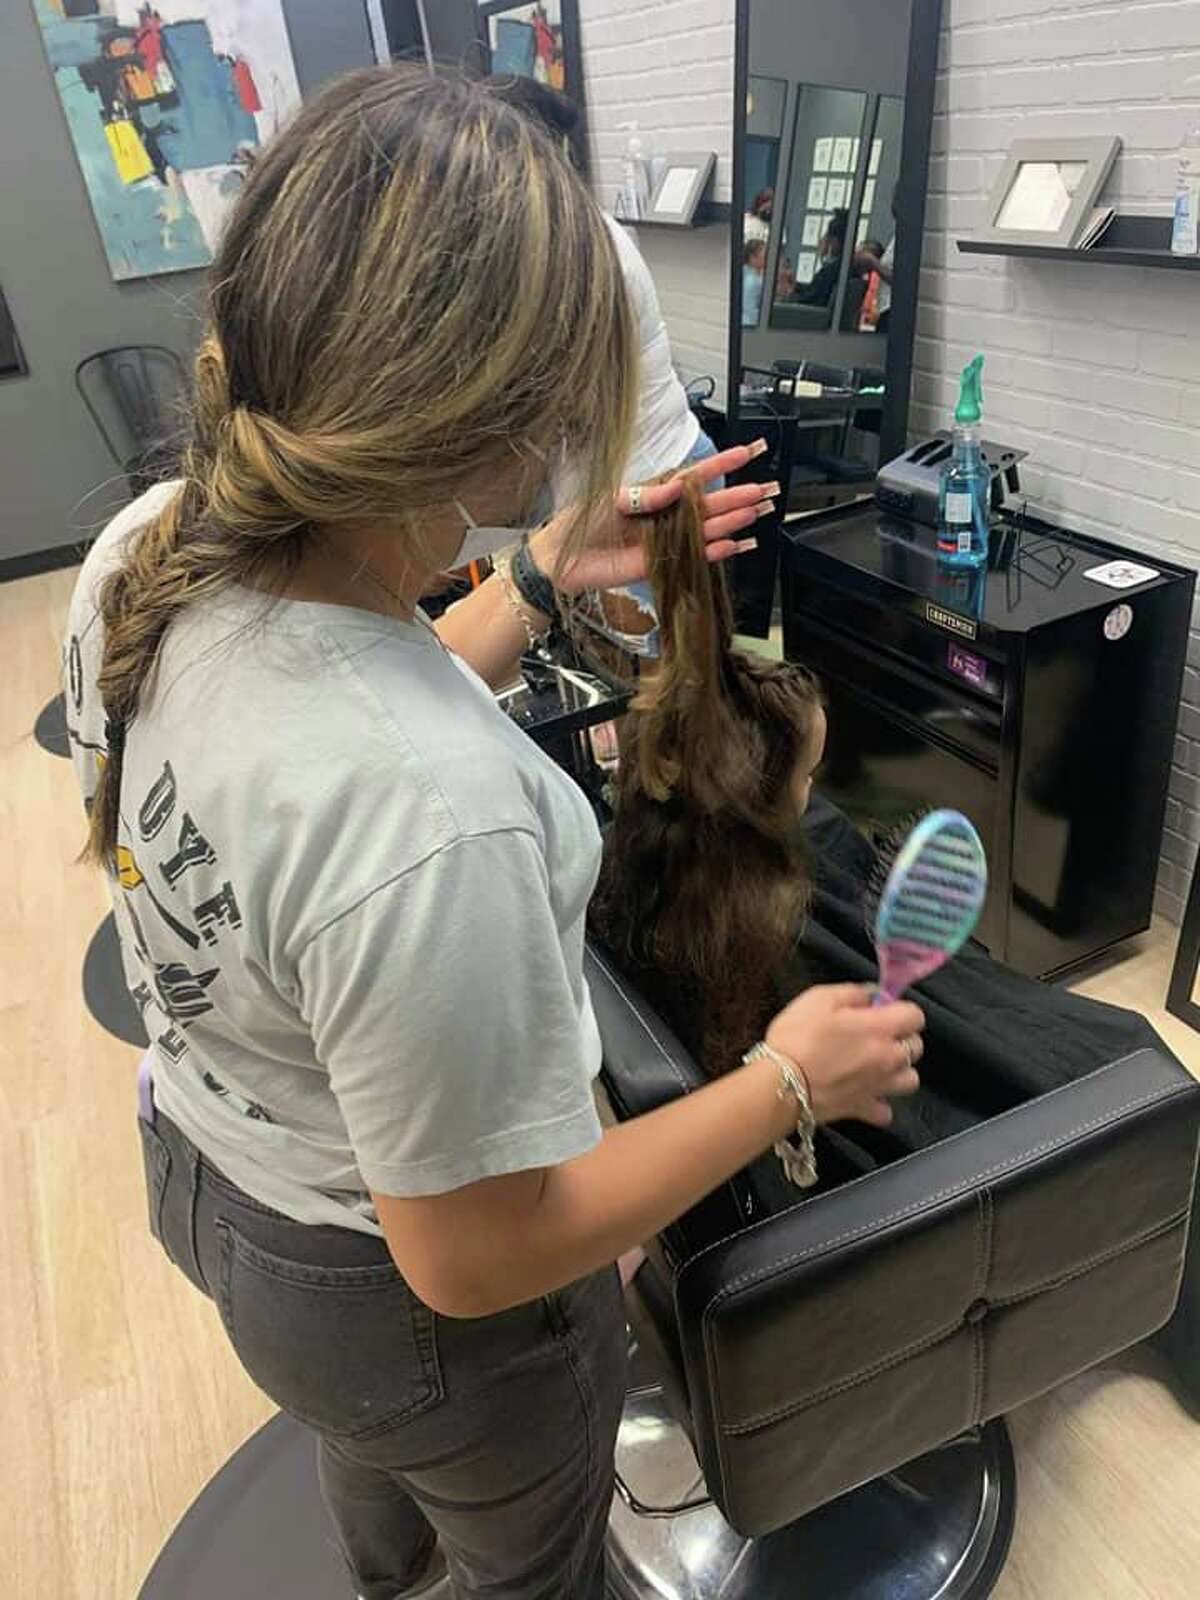 Dozens of fades, tapers, braids and trims for boys and girls were performed by the staff, including Kane’s wife, Olivia who owns the adjoining salon and spa, Do or Dye.